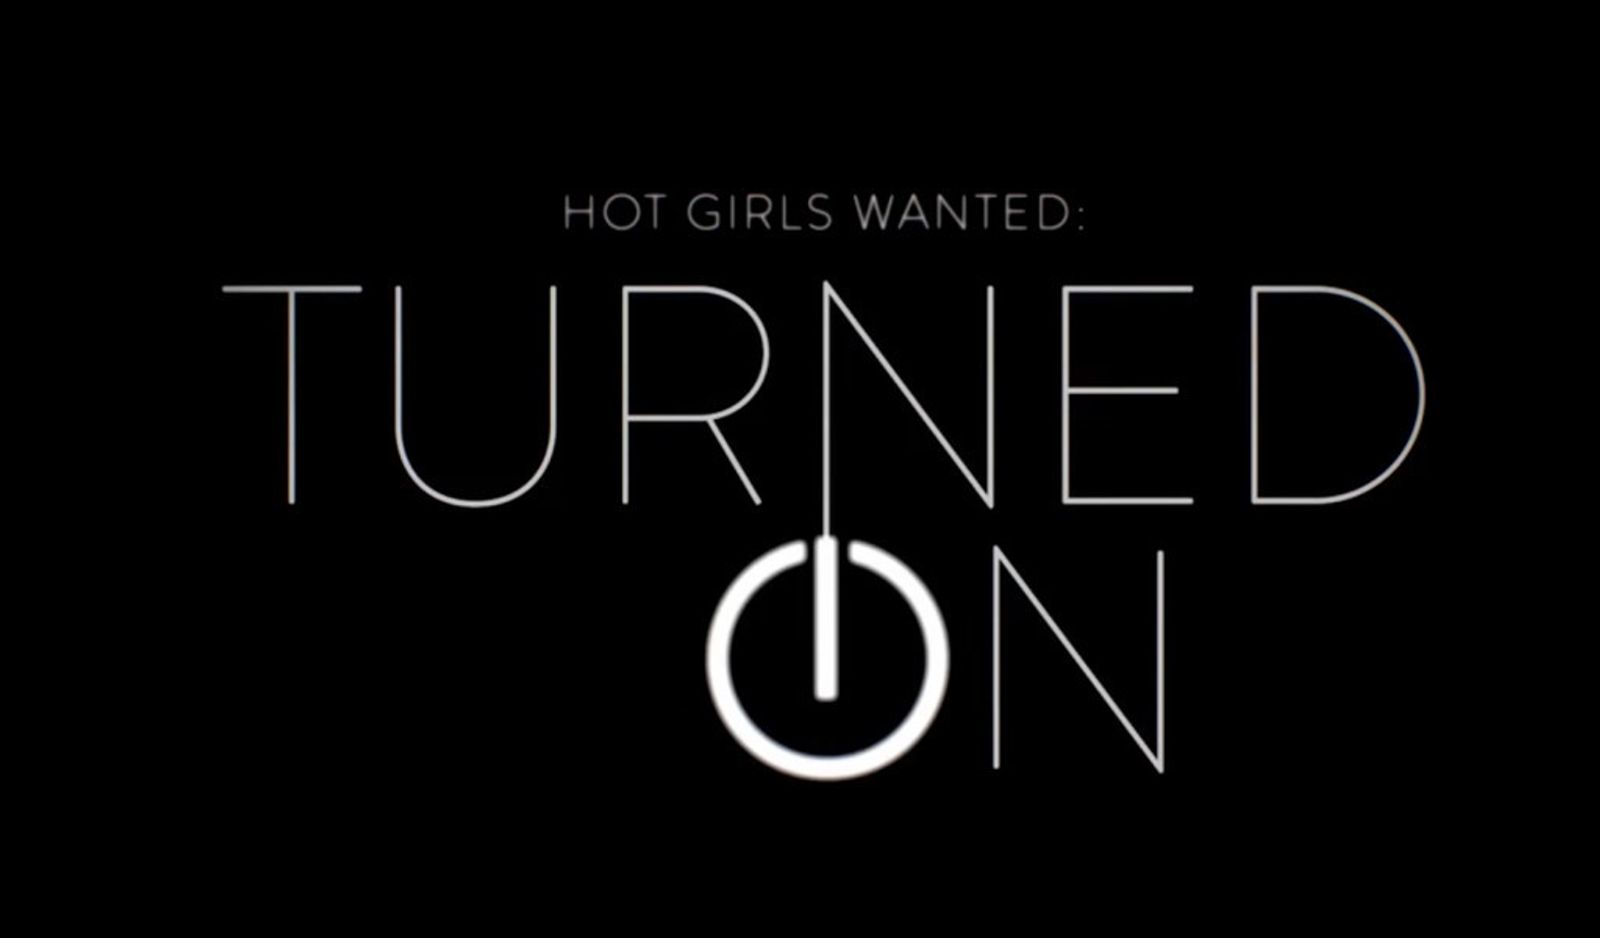 Bauer & Gradus Deny Porn Stars' Charges Re: HGW: Turned On